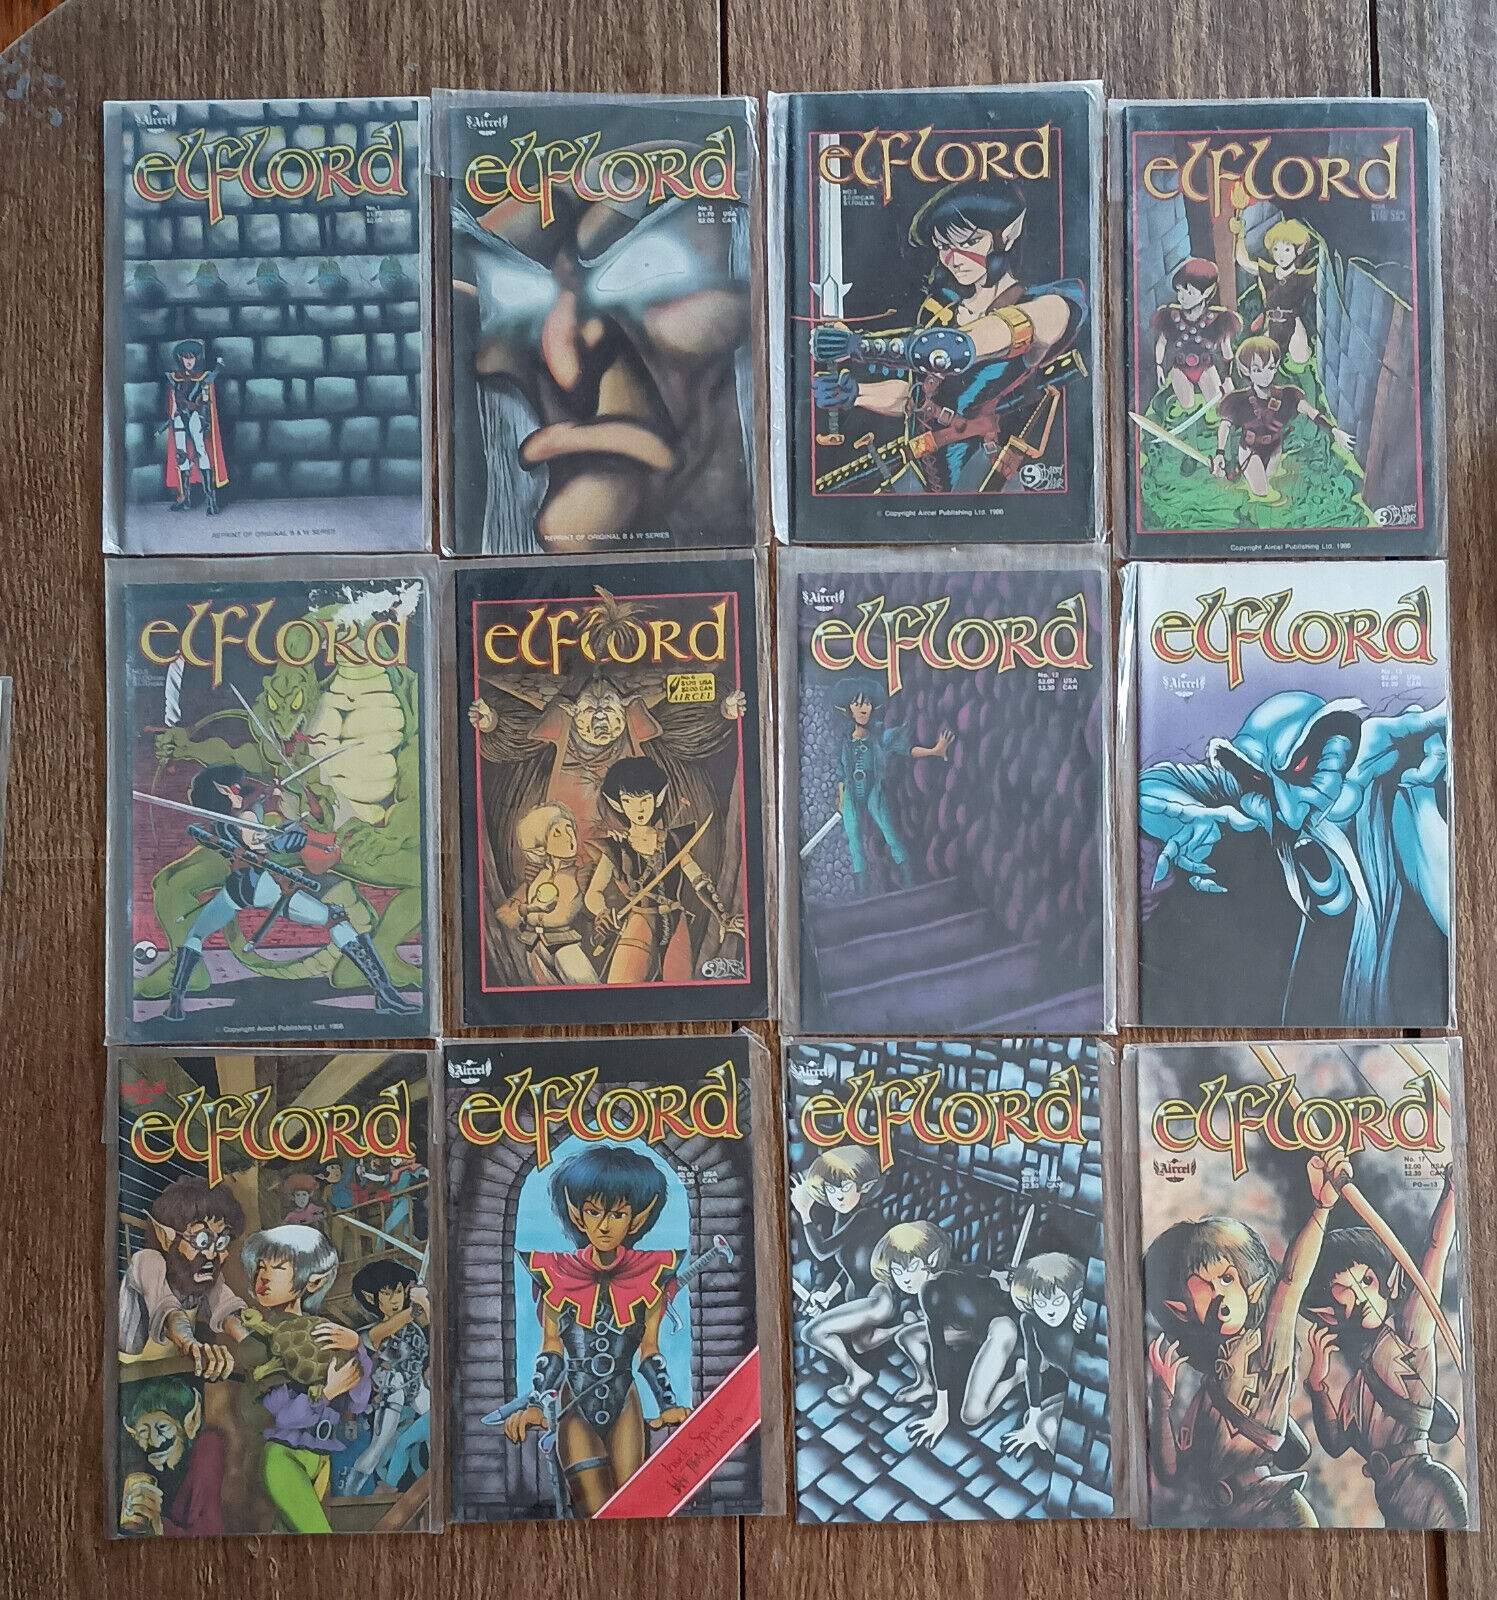 ELFLORD #1-6, 12-18, 15 1/2, 31, AND VOL 2 #1-11 (AIRCEL, 1986) Lot of 26 Comics